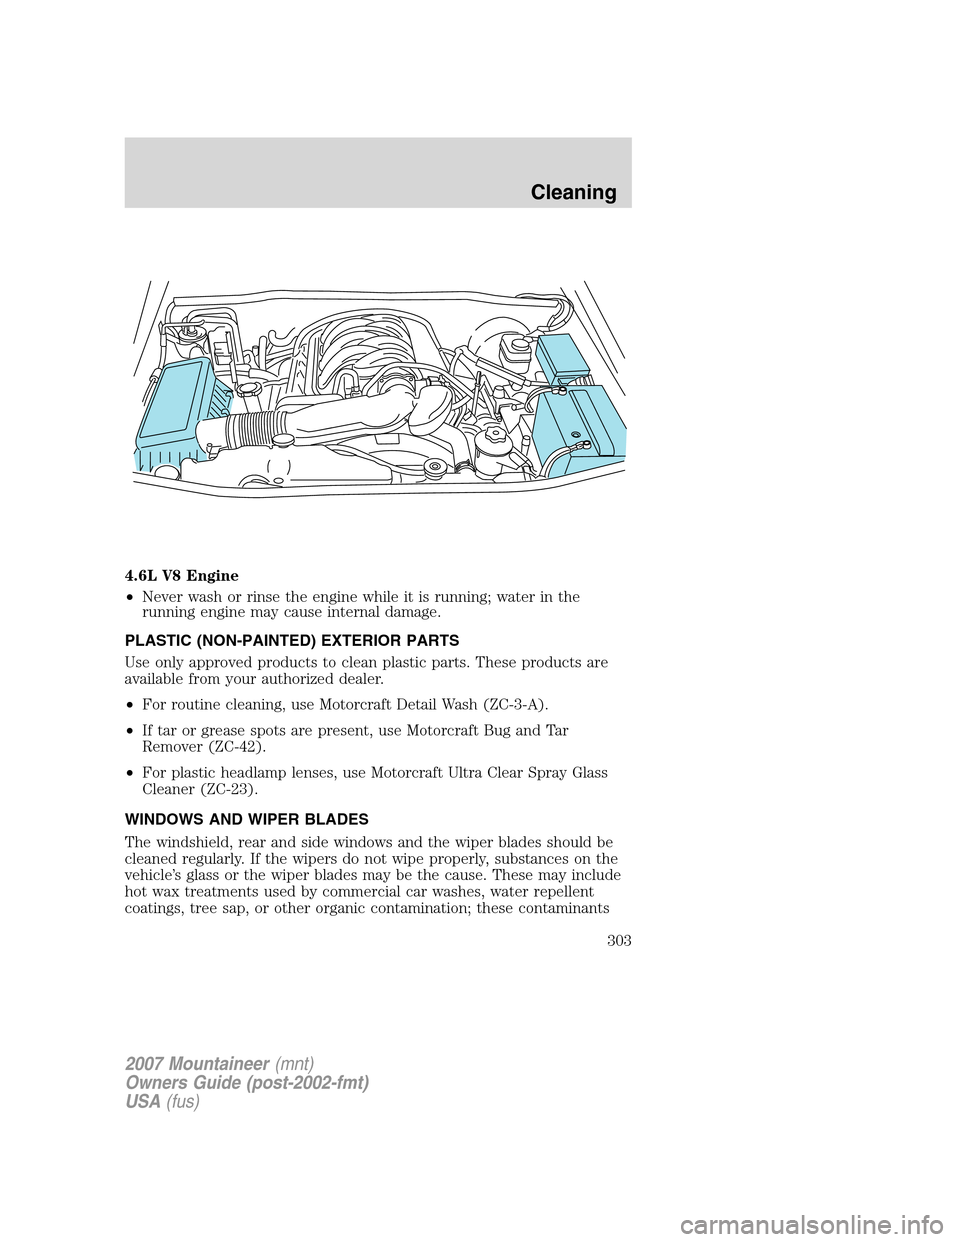 Mercury Mountaineer 2007  Owners Manuals 4.6L V8 Engine
•Never wash or rinse the engine while it is running; water in the
running engine may cause internal damage.
PLASTIC (NON-PAINTED) EXTERIOR PARTS
Use only approved products to clean pl